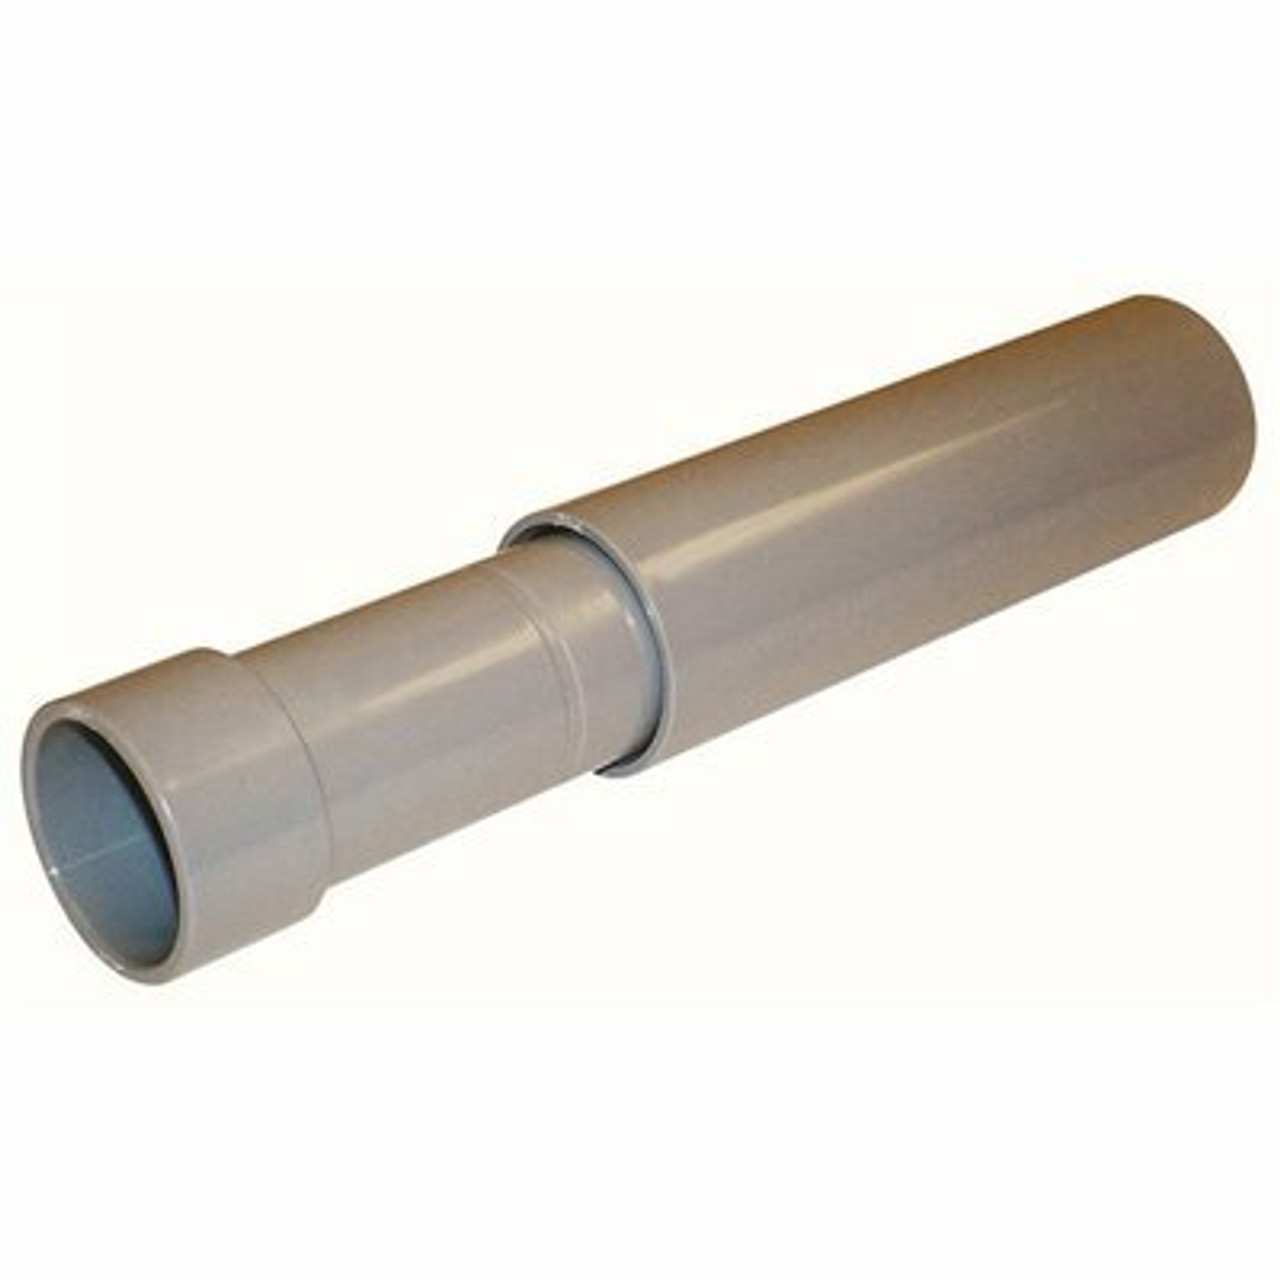 Carlon 2 In. Schedule 40 And 80 Pvc Expansion Coupling